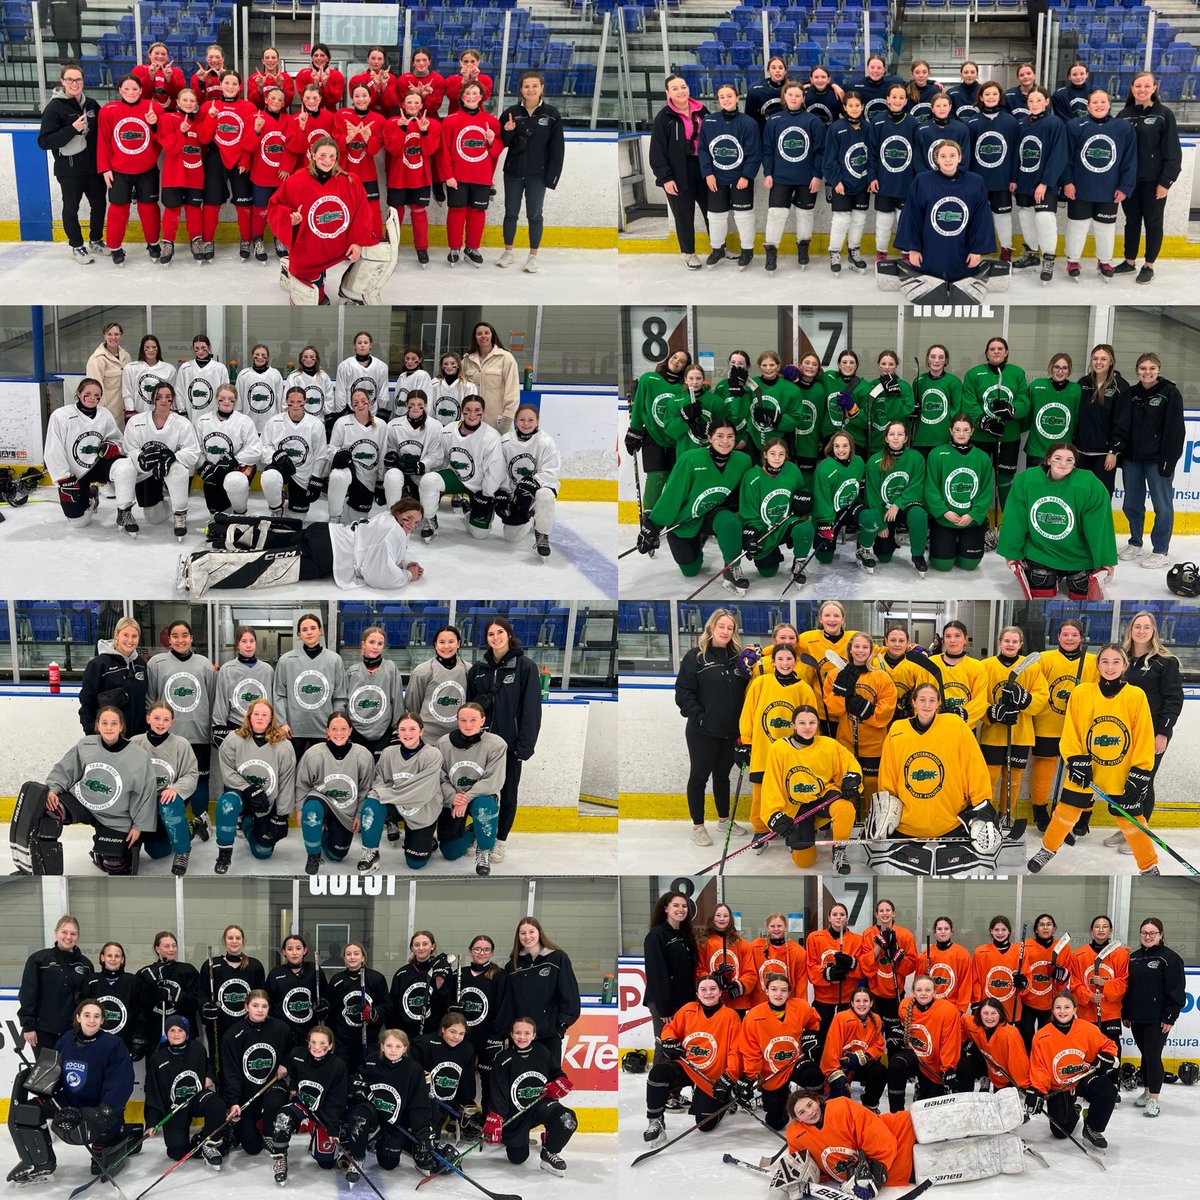 That’s all folks! The #SaskFirst Female Futures Tournament Weekend has wrapped up from Regina! Special thank you to all the players, coaches, officials and support staff for putting on an excellent event 🏒